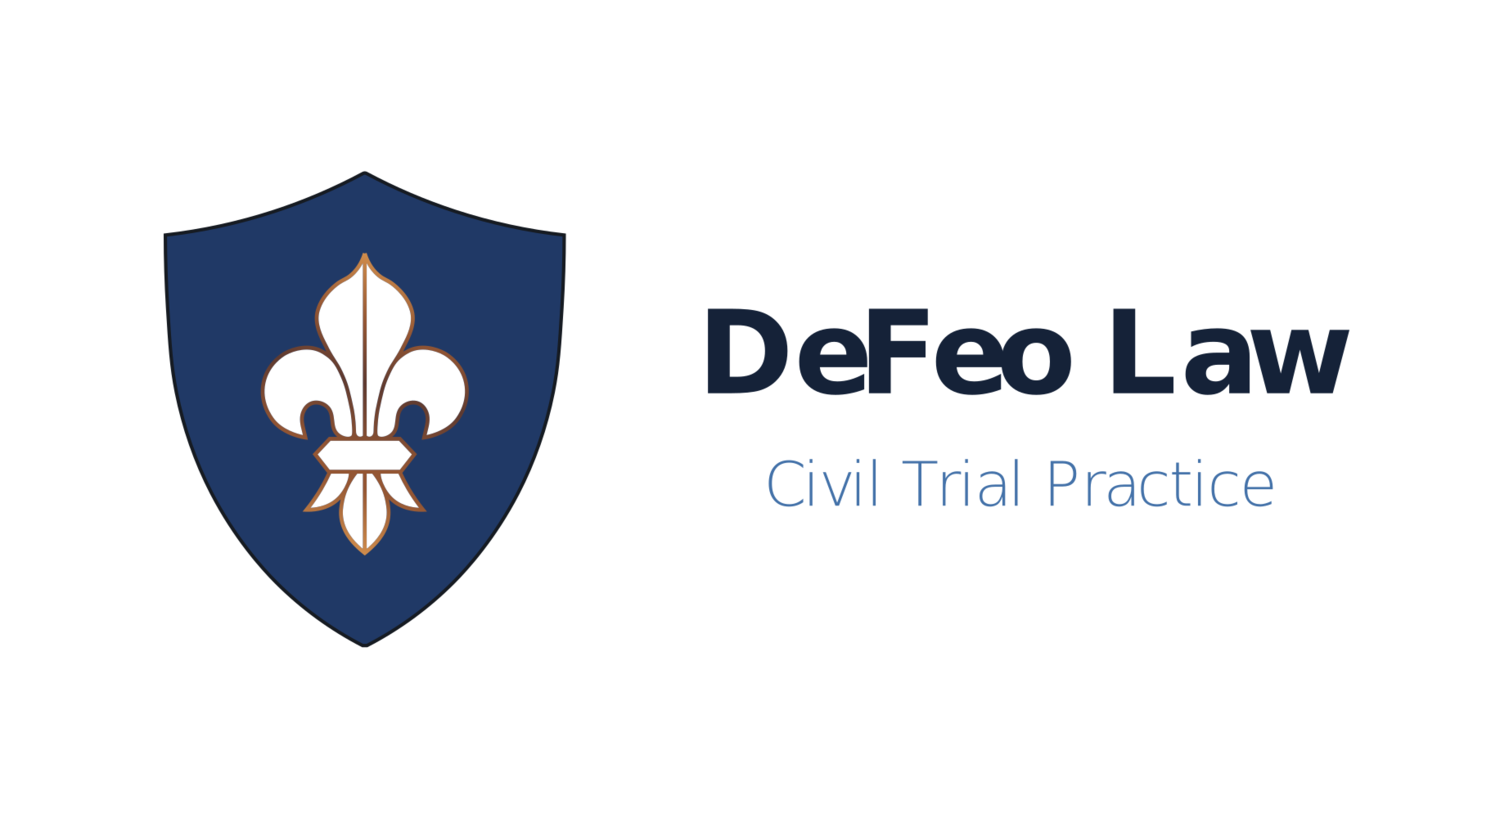 The DeFeo Law Firm